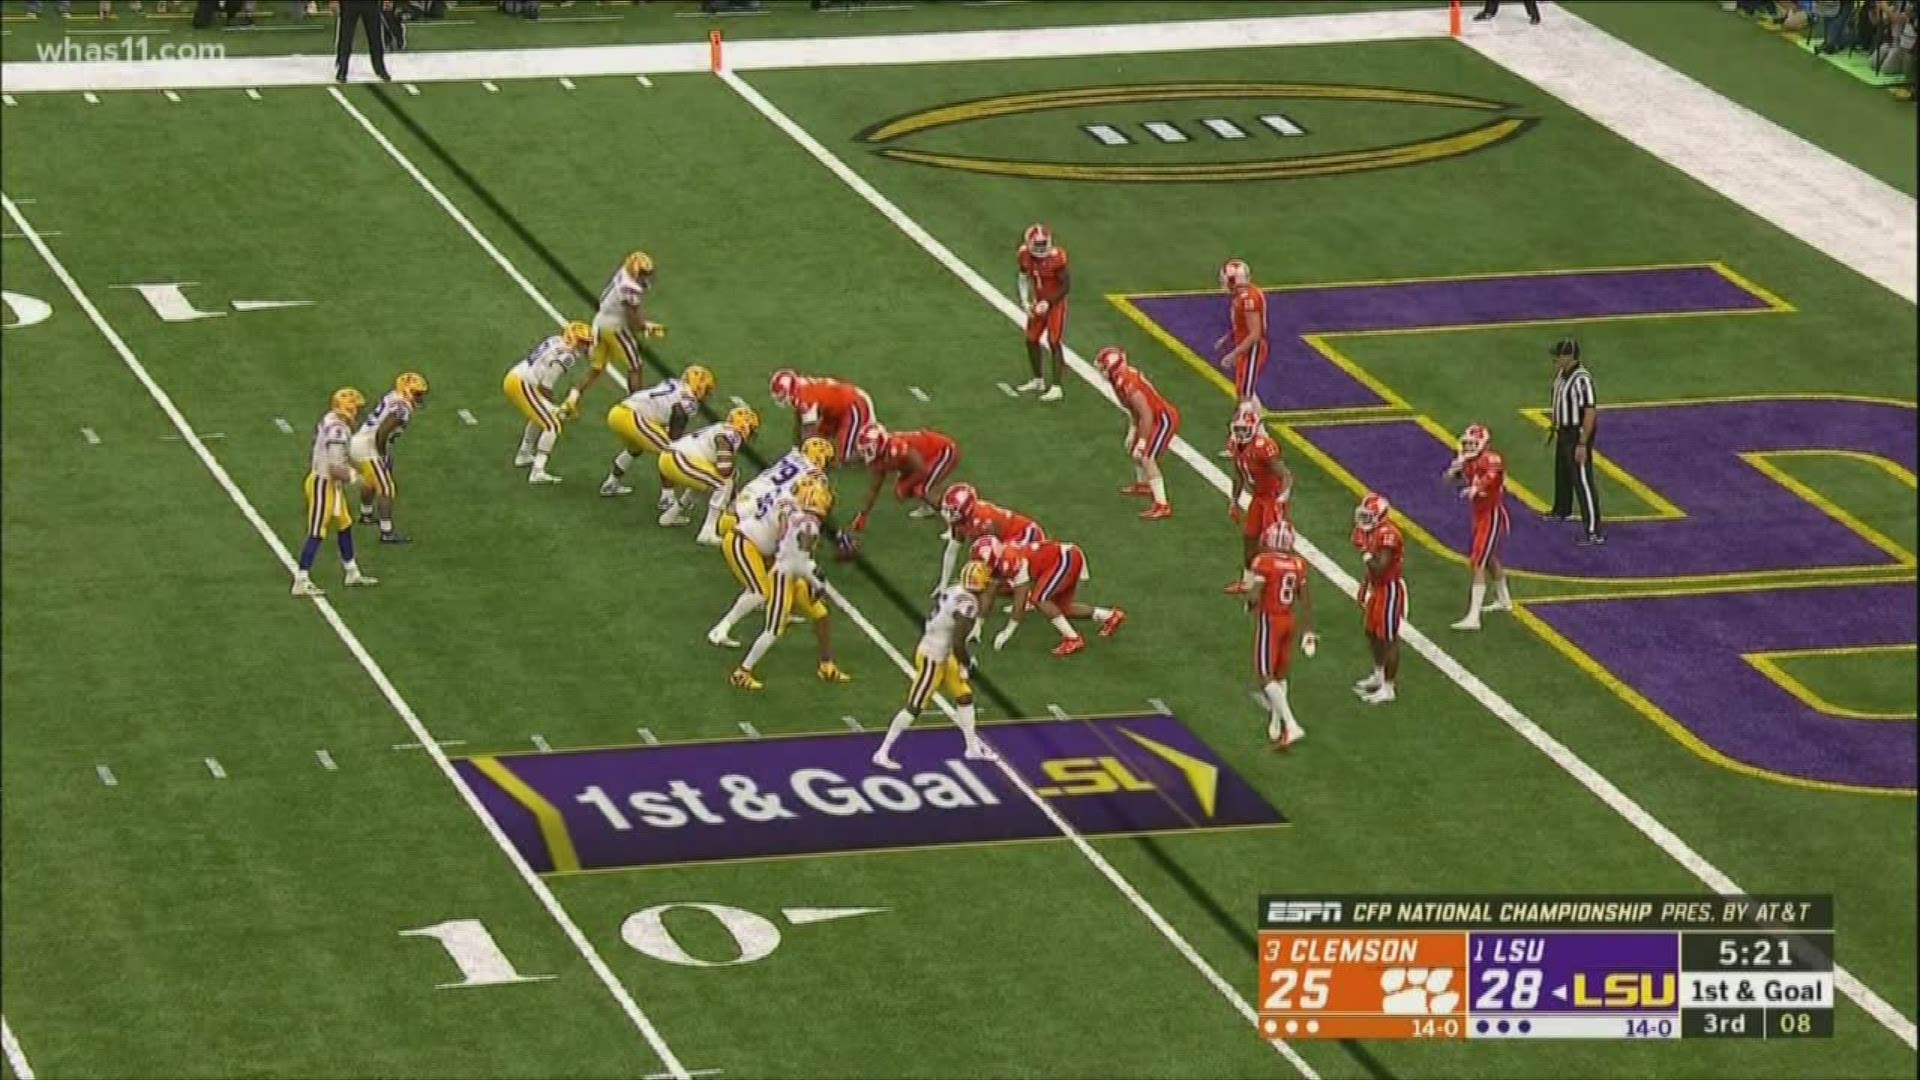 LSU capped off its undefeated season with a 42-25 win over Clemson.